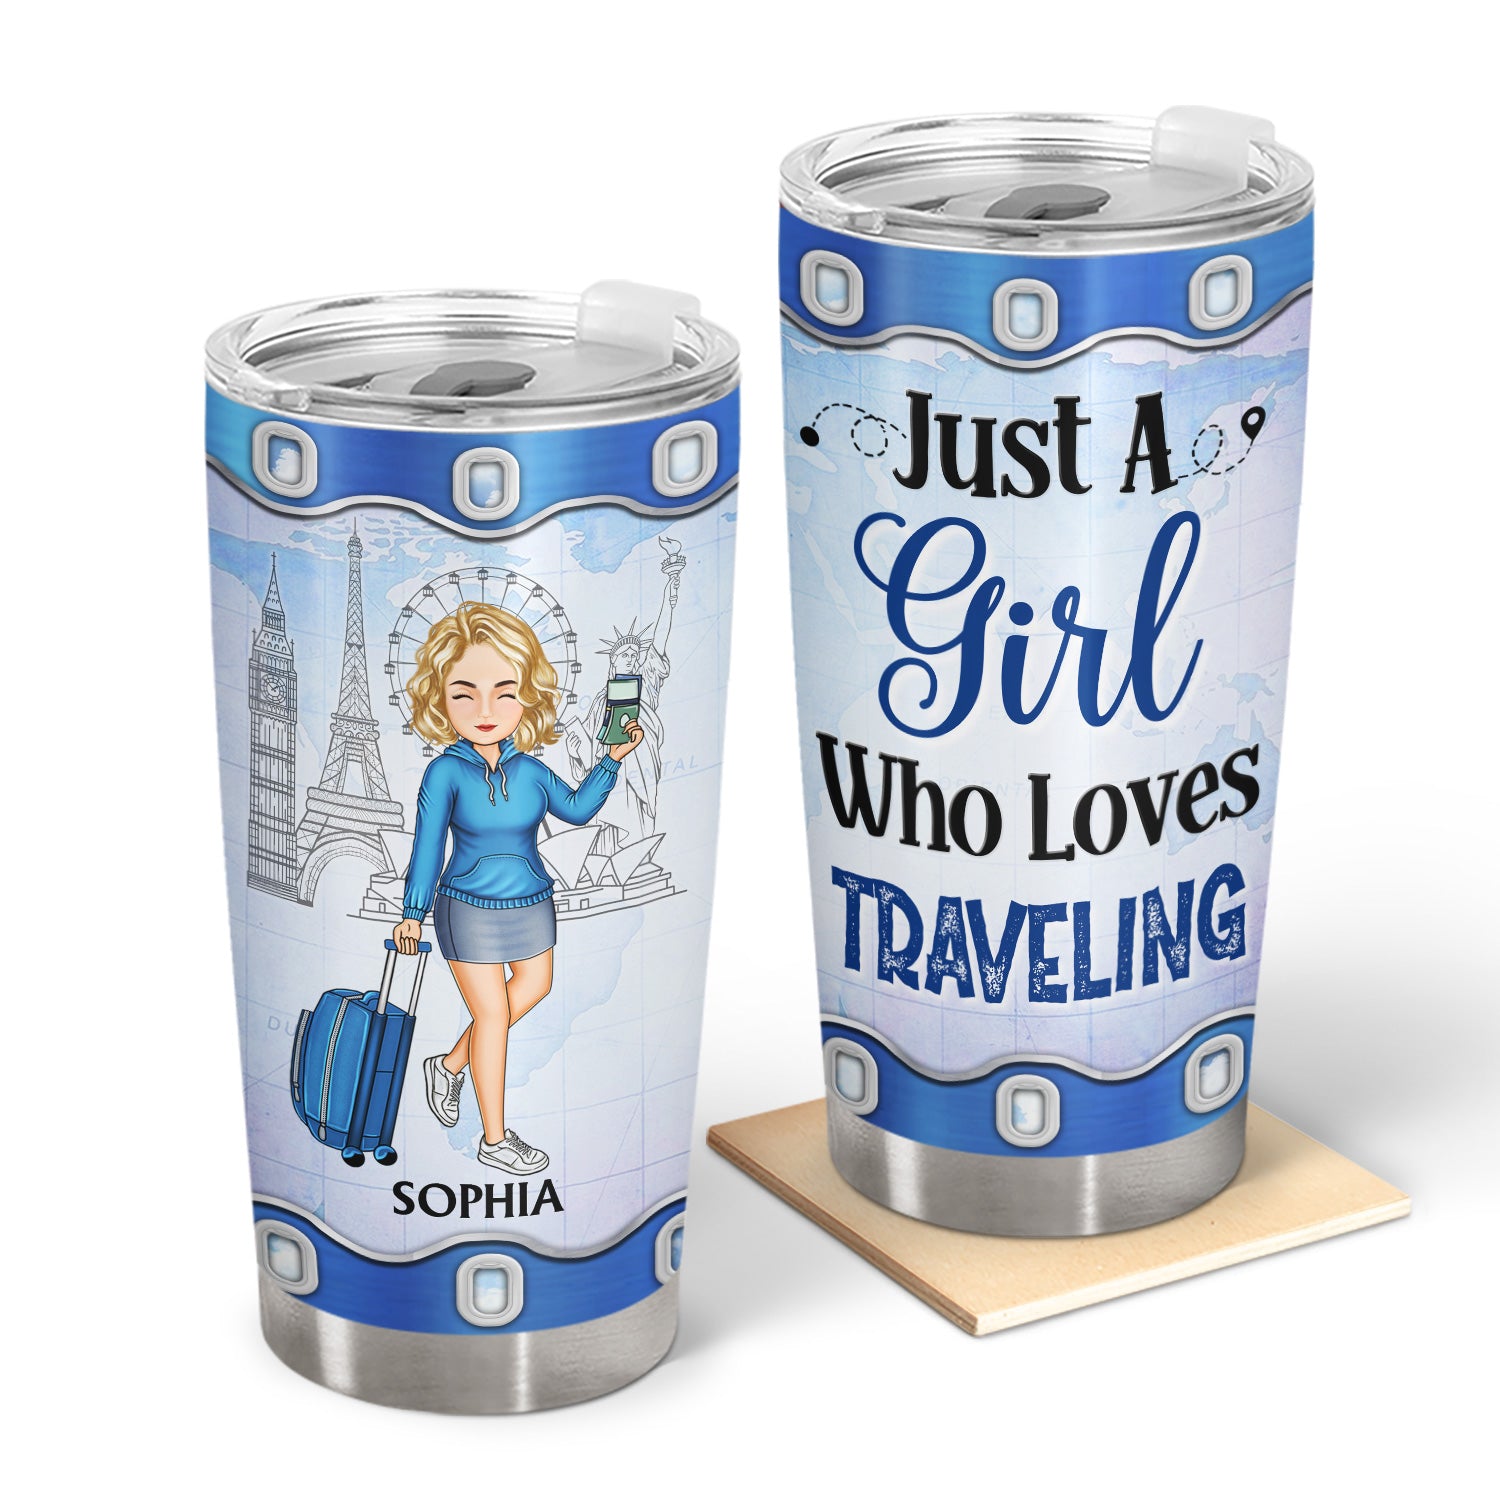 Just A Girl Boy Who Loves Traveling Cruising - Birthday Gift For Him, Her, Kid, Friends, Family, Trippin', Vacation Lovers - Personalized Custom Tumbler